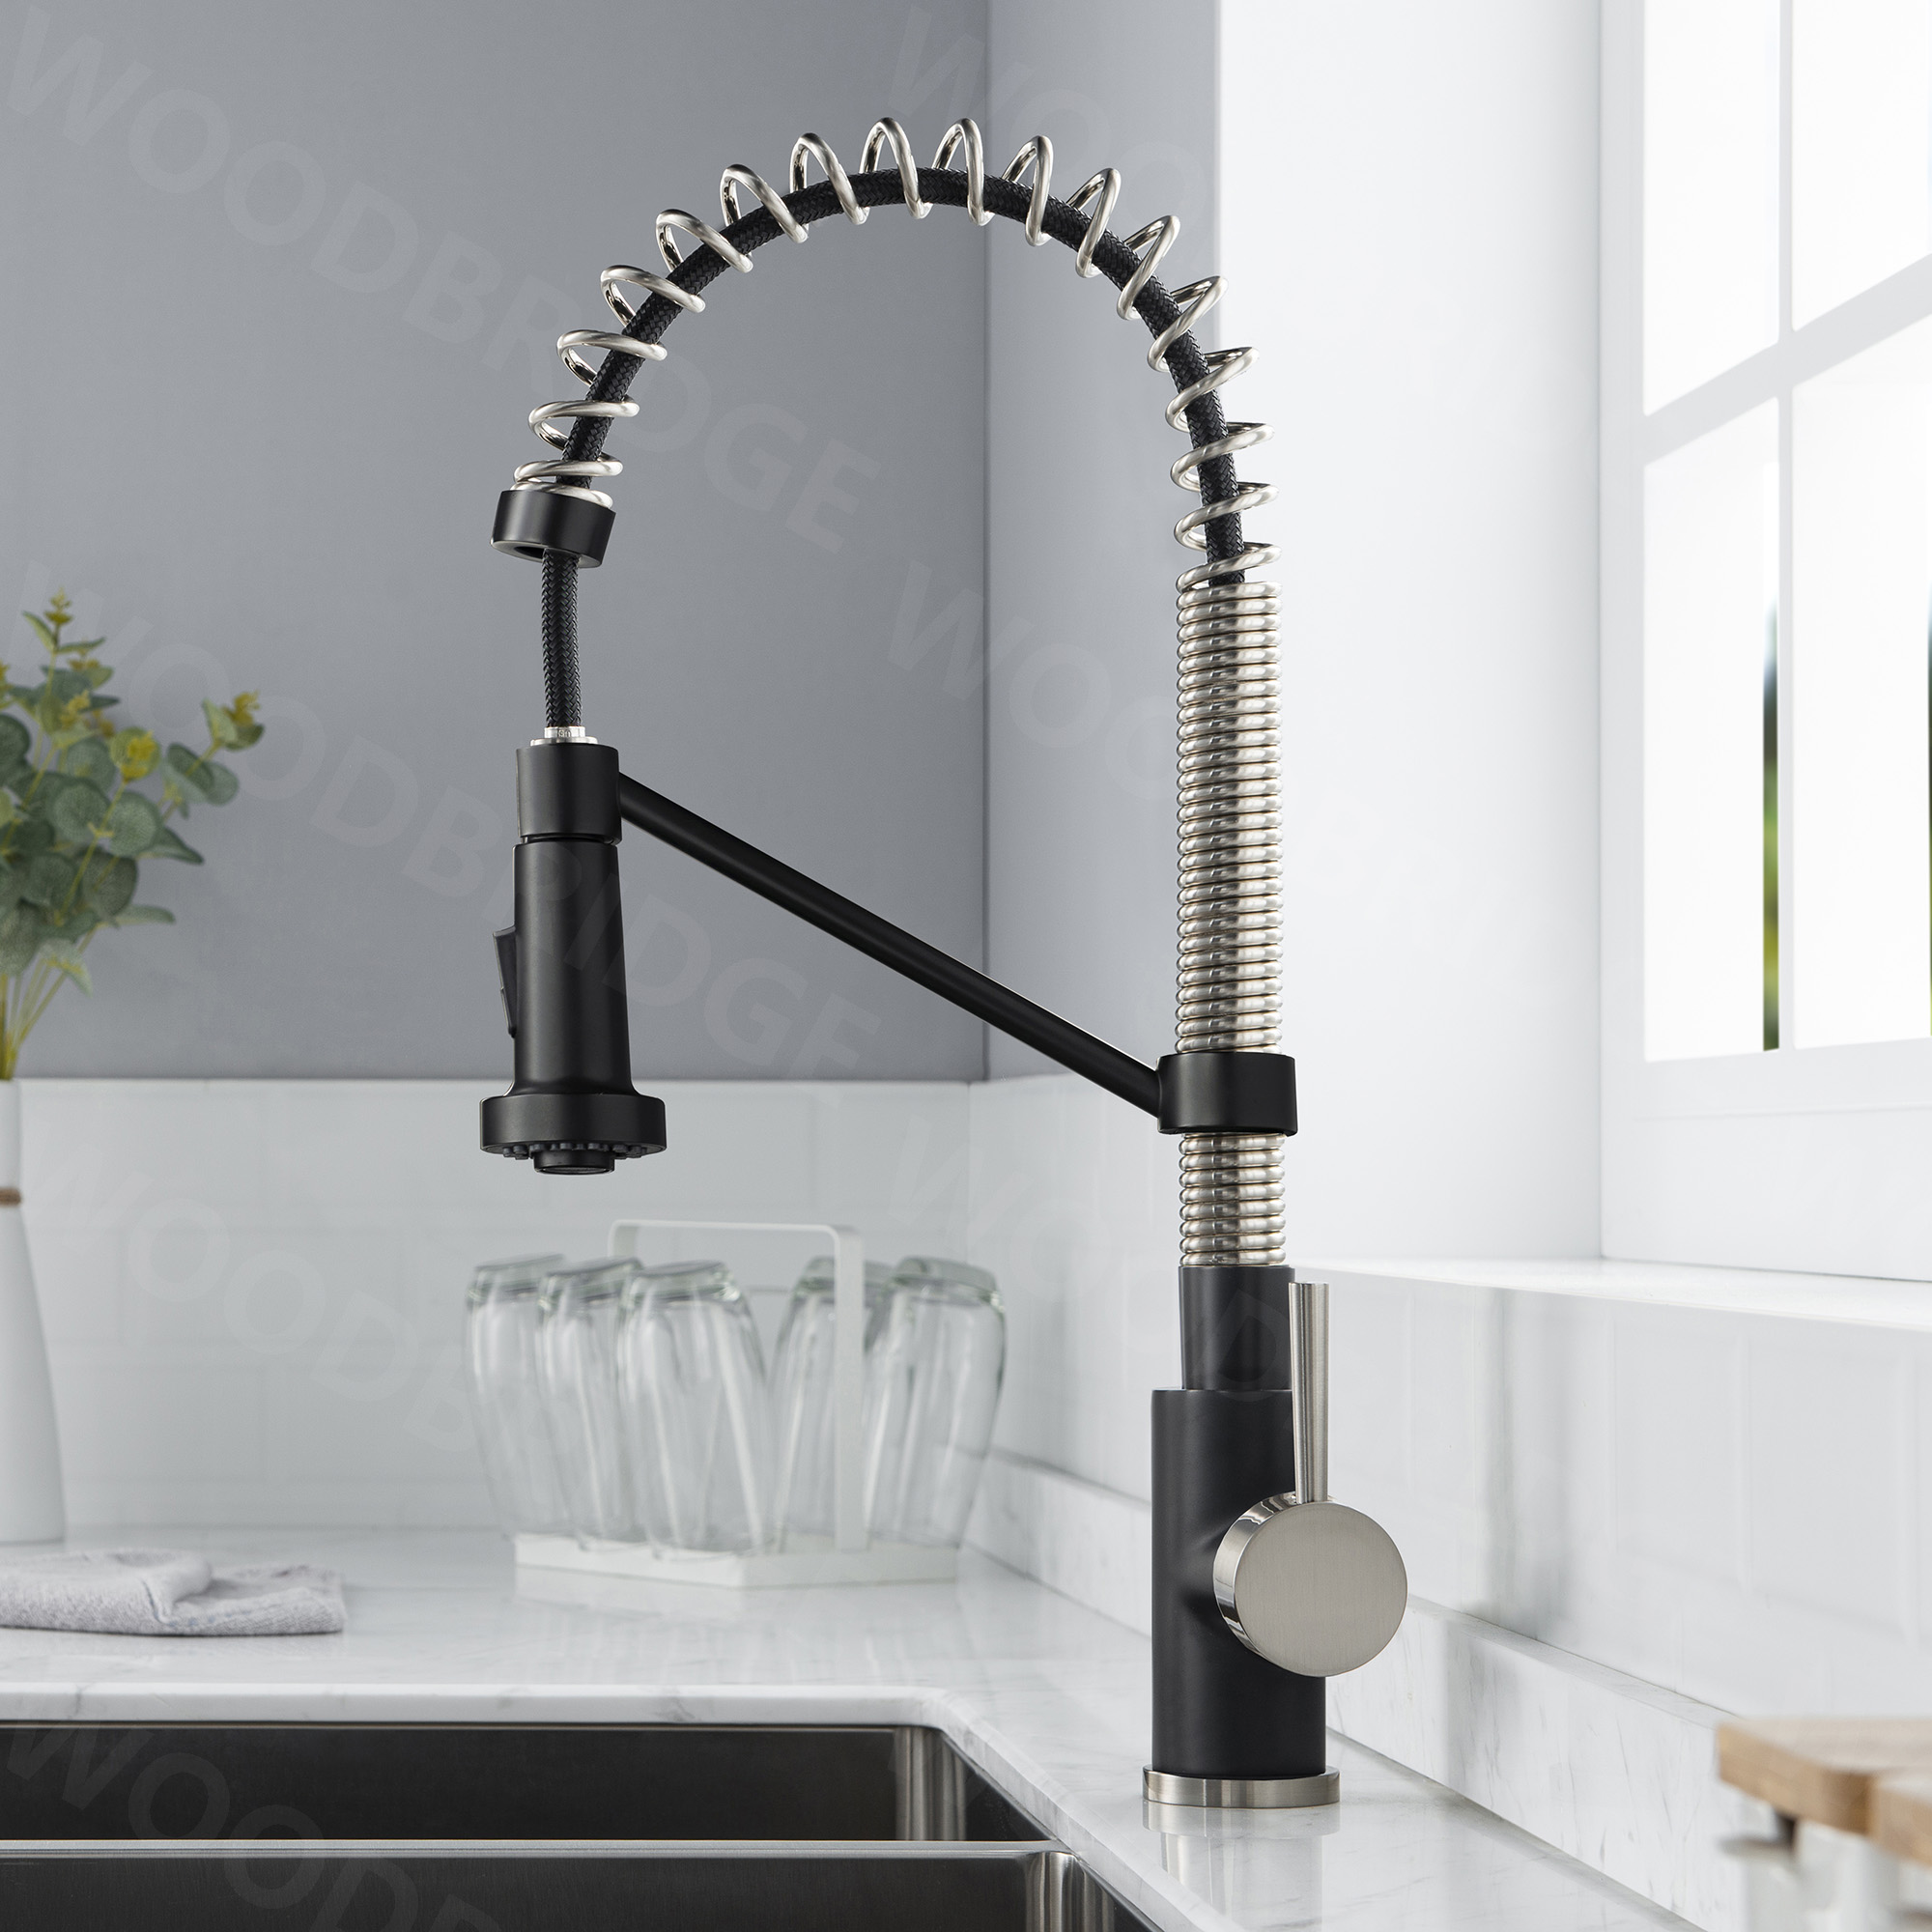 WOODBRIDGE WK010203BL Stainless Steel Single Handle Spring Coil Pre-Rinse Kitchen Faucet with Pull Down Sprayer, Matte Black Finish